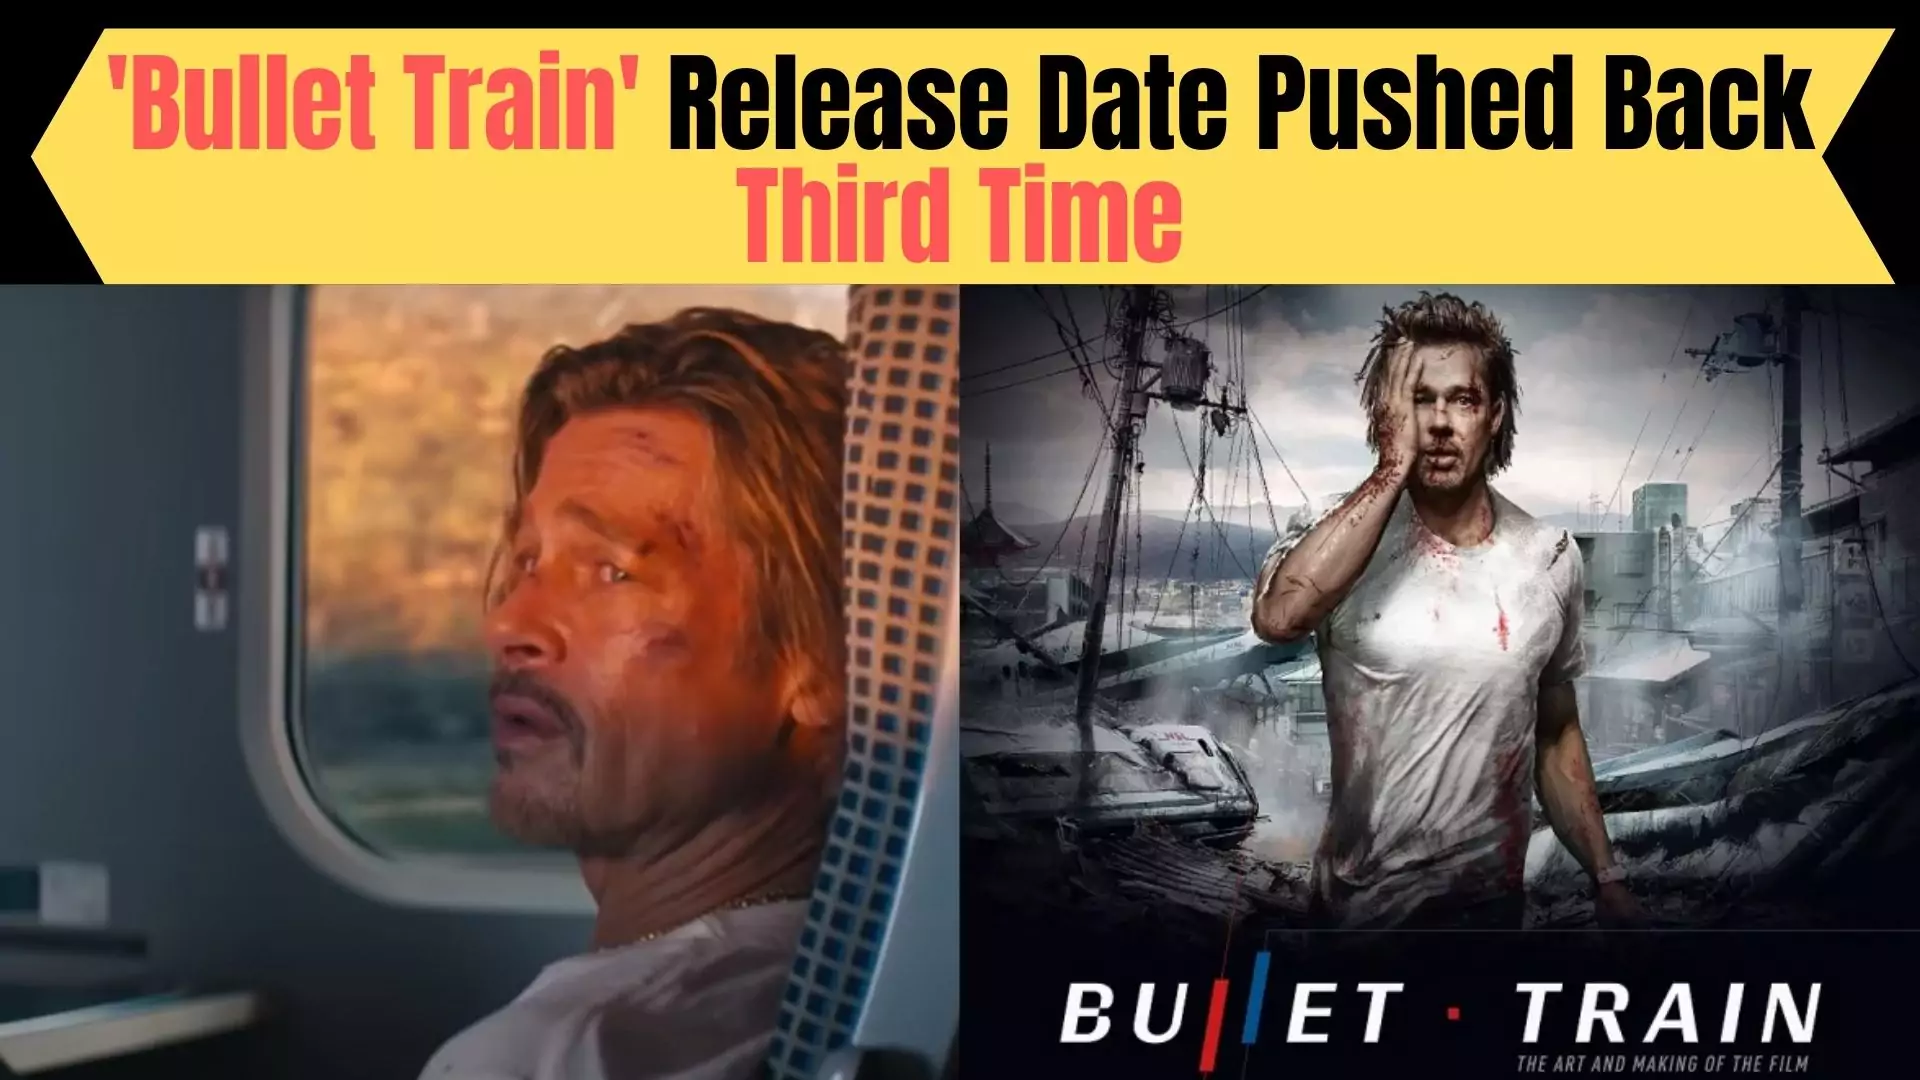 'Bullet Train' Release Date Pushed Back Third Time